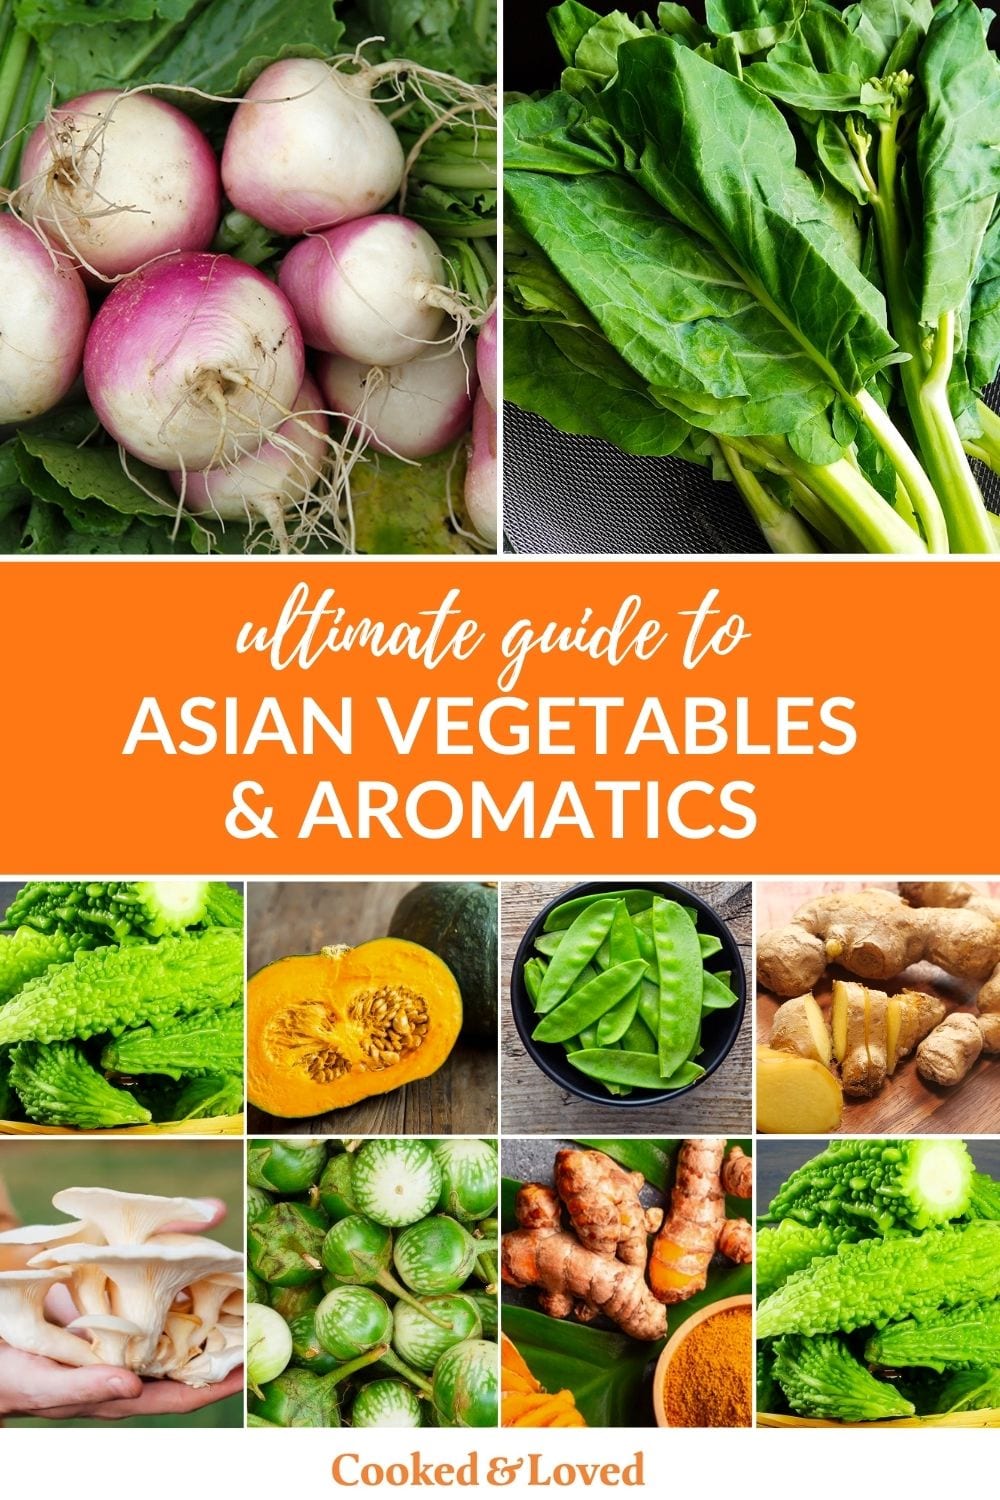 Ultimate Guide To Asian Vegetables (Greens, Aromatics & Mushrooms)